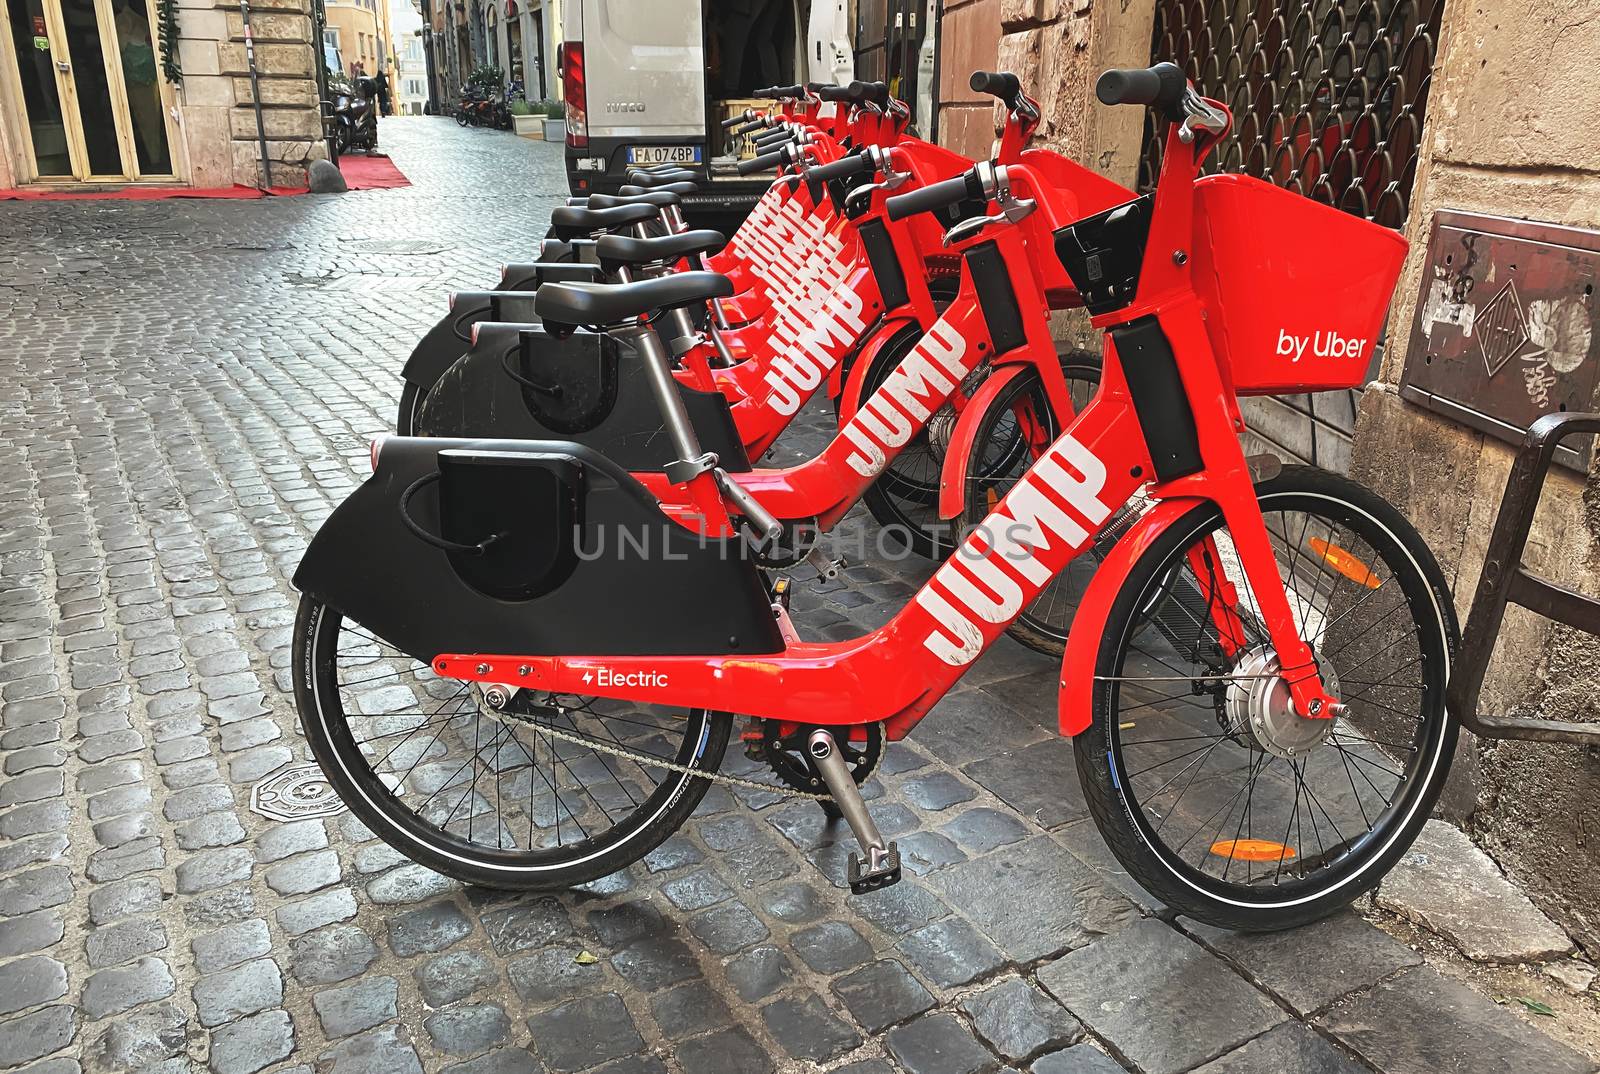 a group of red electric bicycles of the Uber Jump bike-sharing service in Rome by rarrarorro